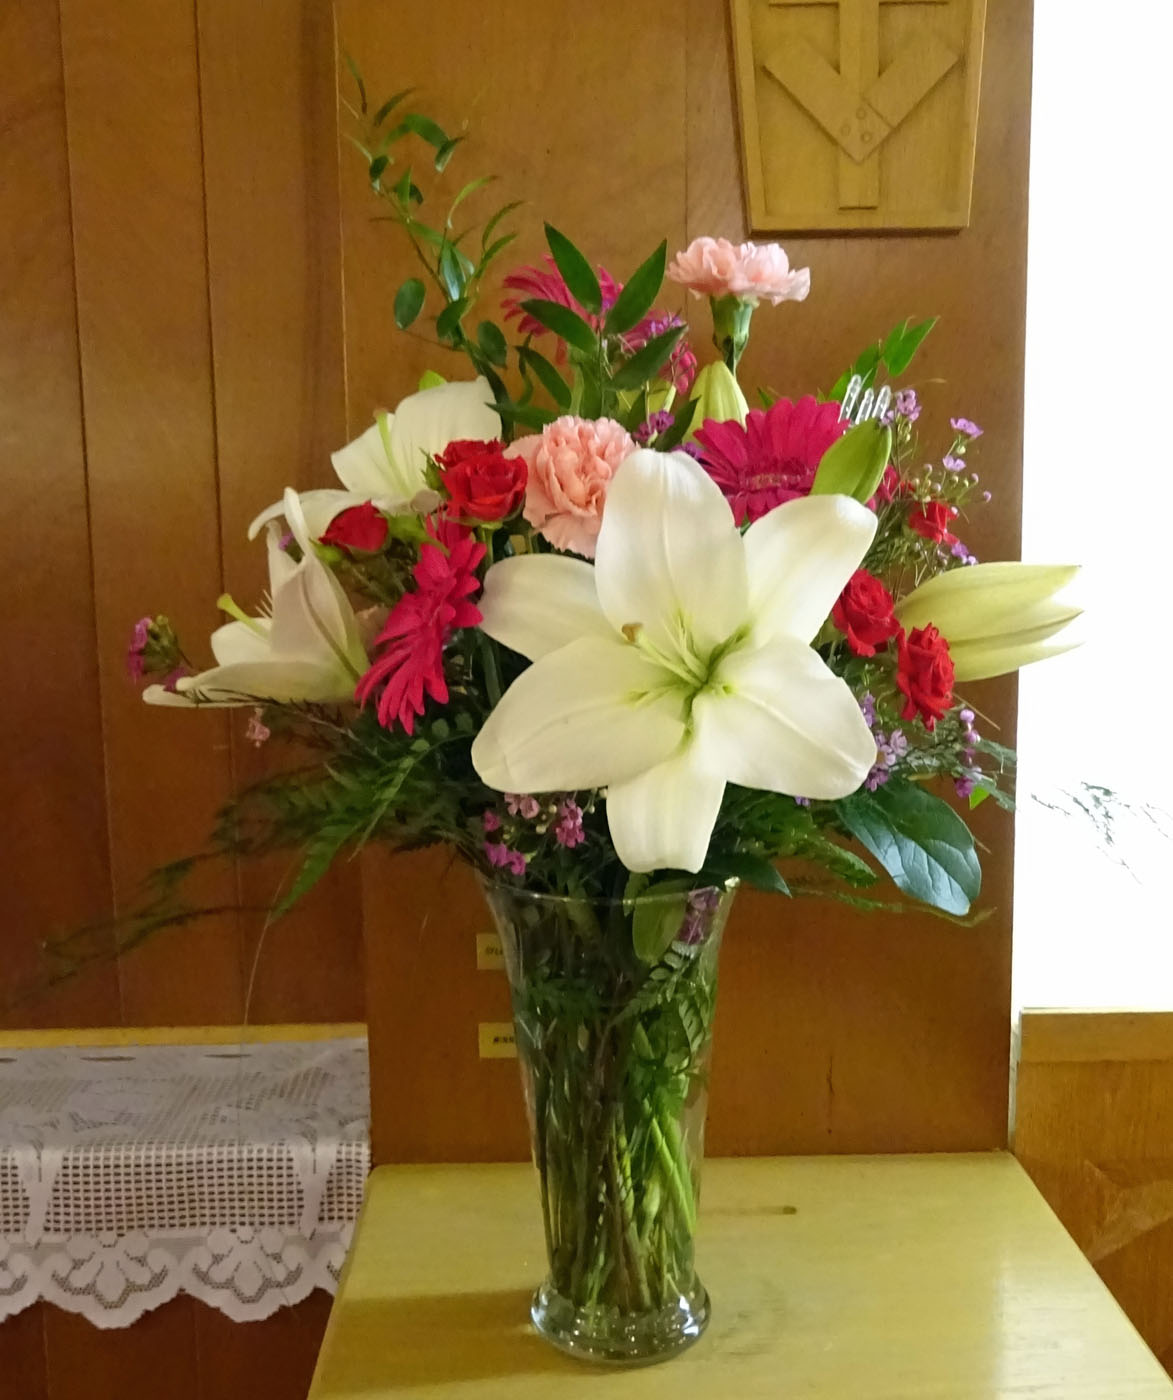 Flowers from The Ted Knutson Family